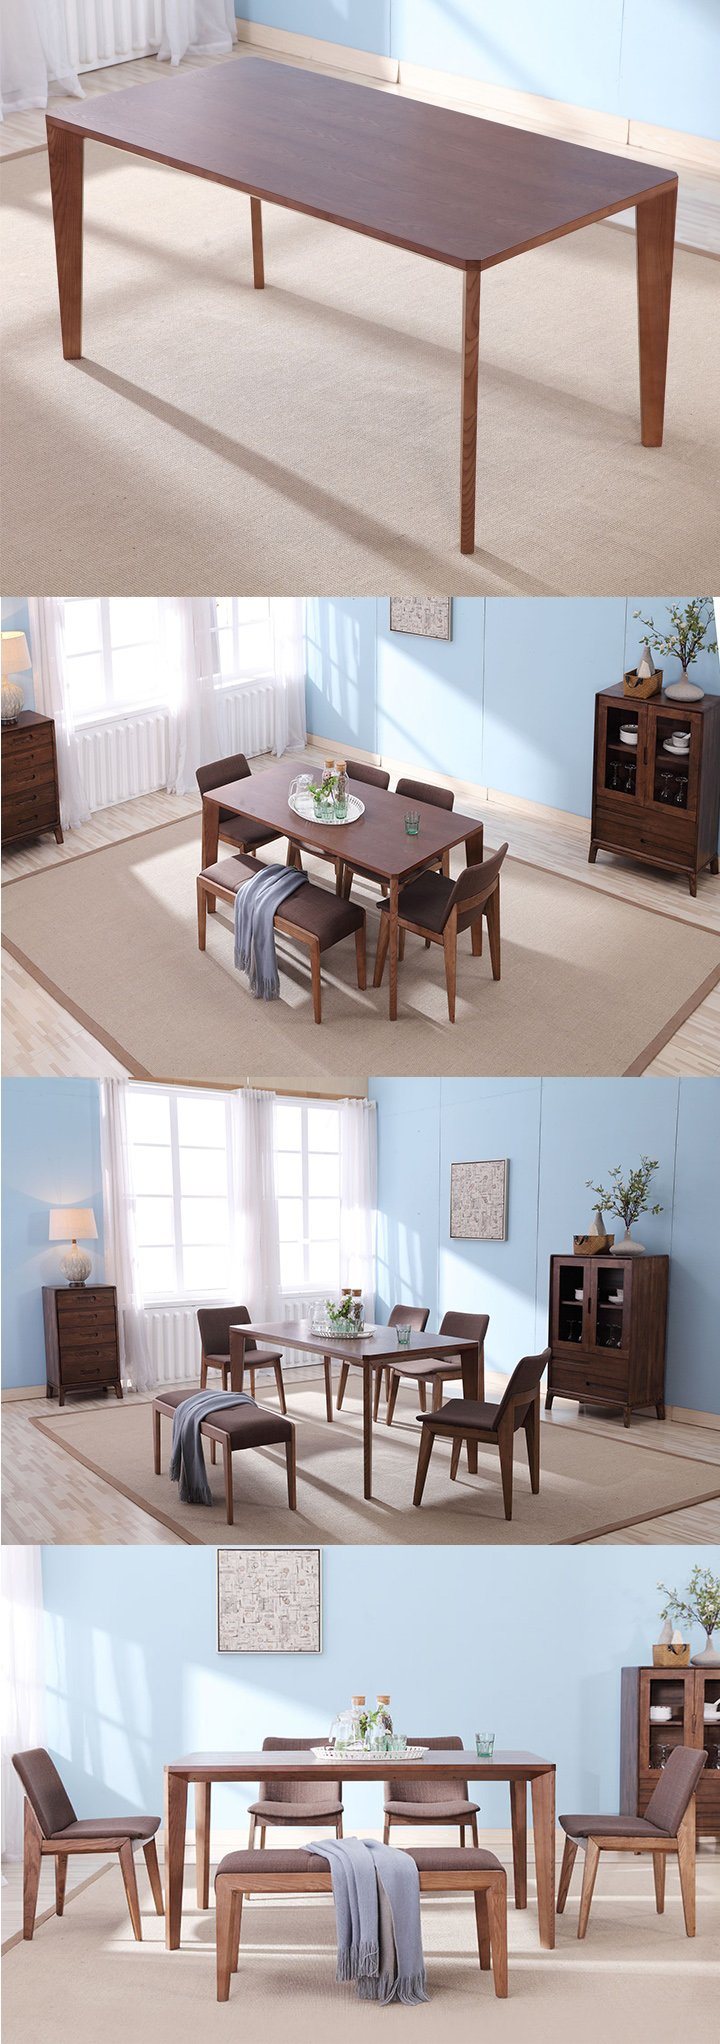 Modern Wooden Furniture Contemporary Wood Dining Table for Home